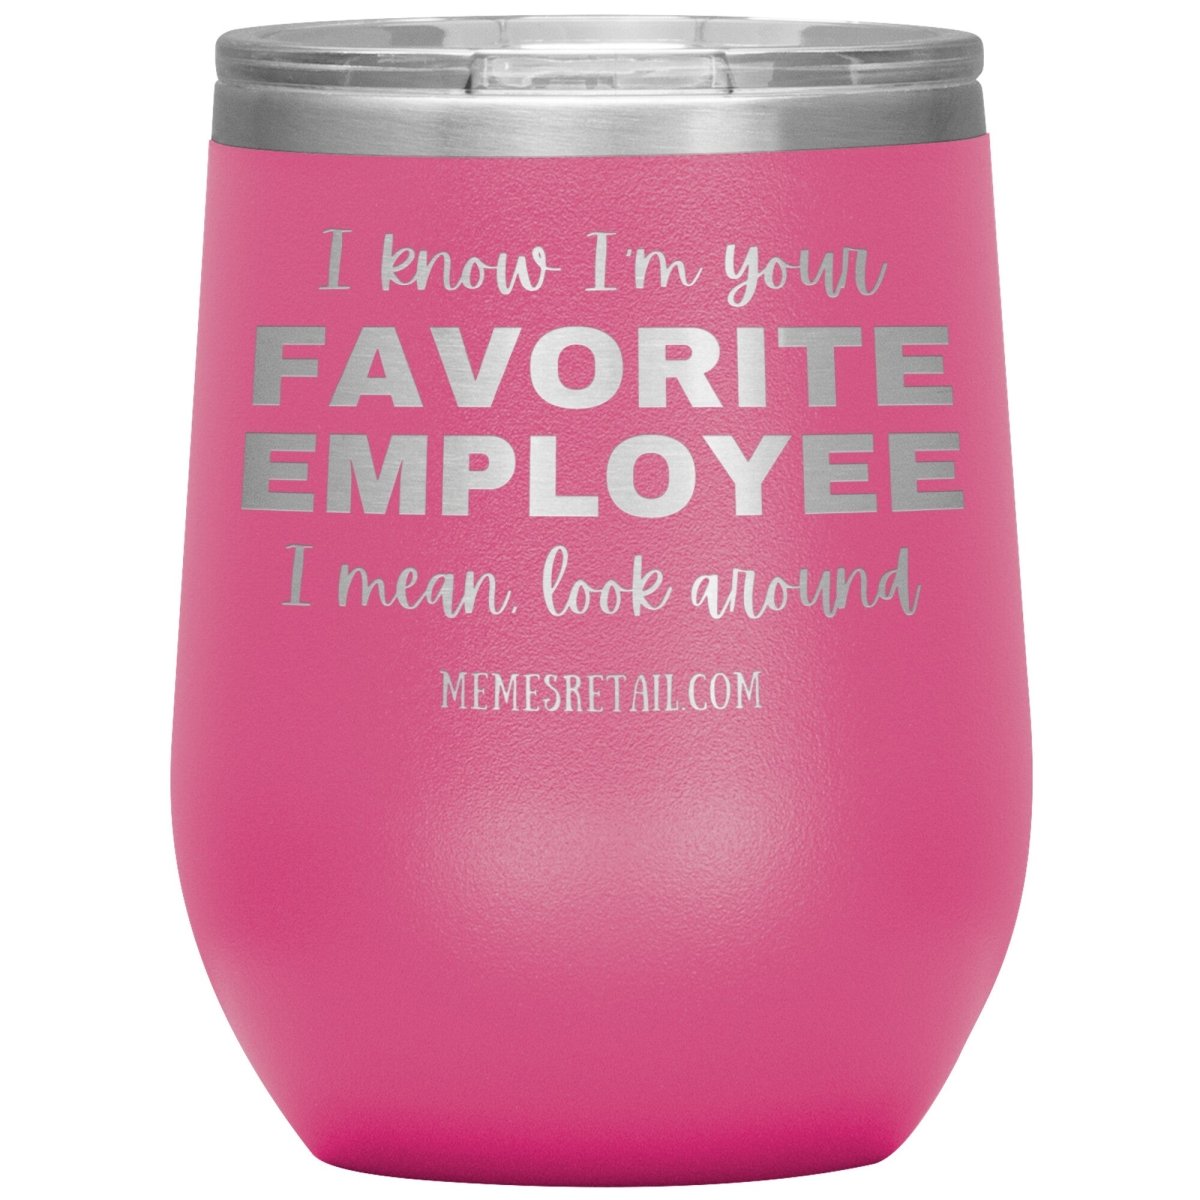 I know I’m your favorite employee, I mean look around, 12oz Wine Insulated Tumbler / Pink - MemesRetail.com